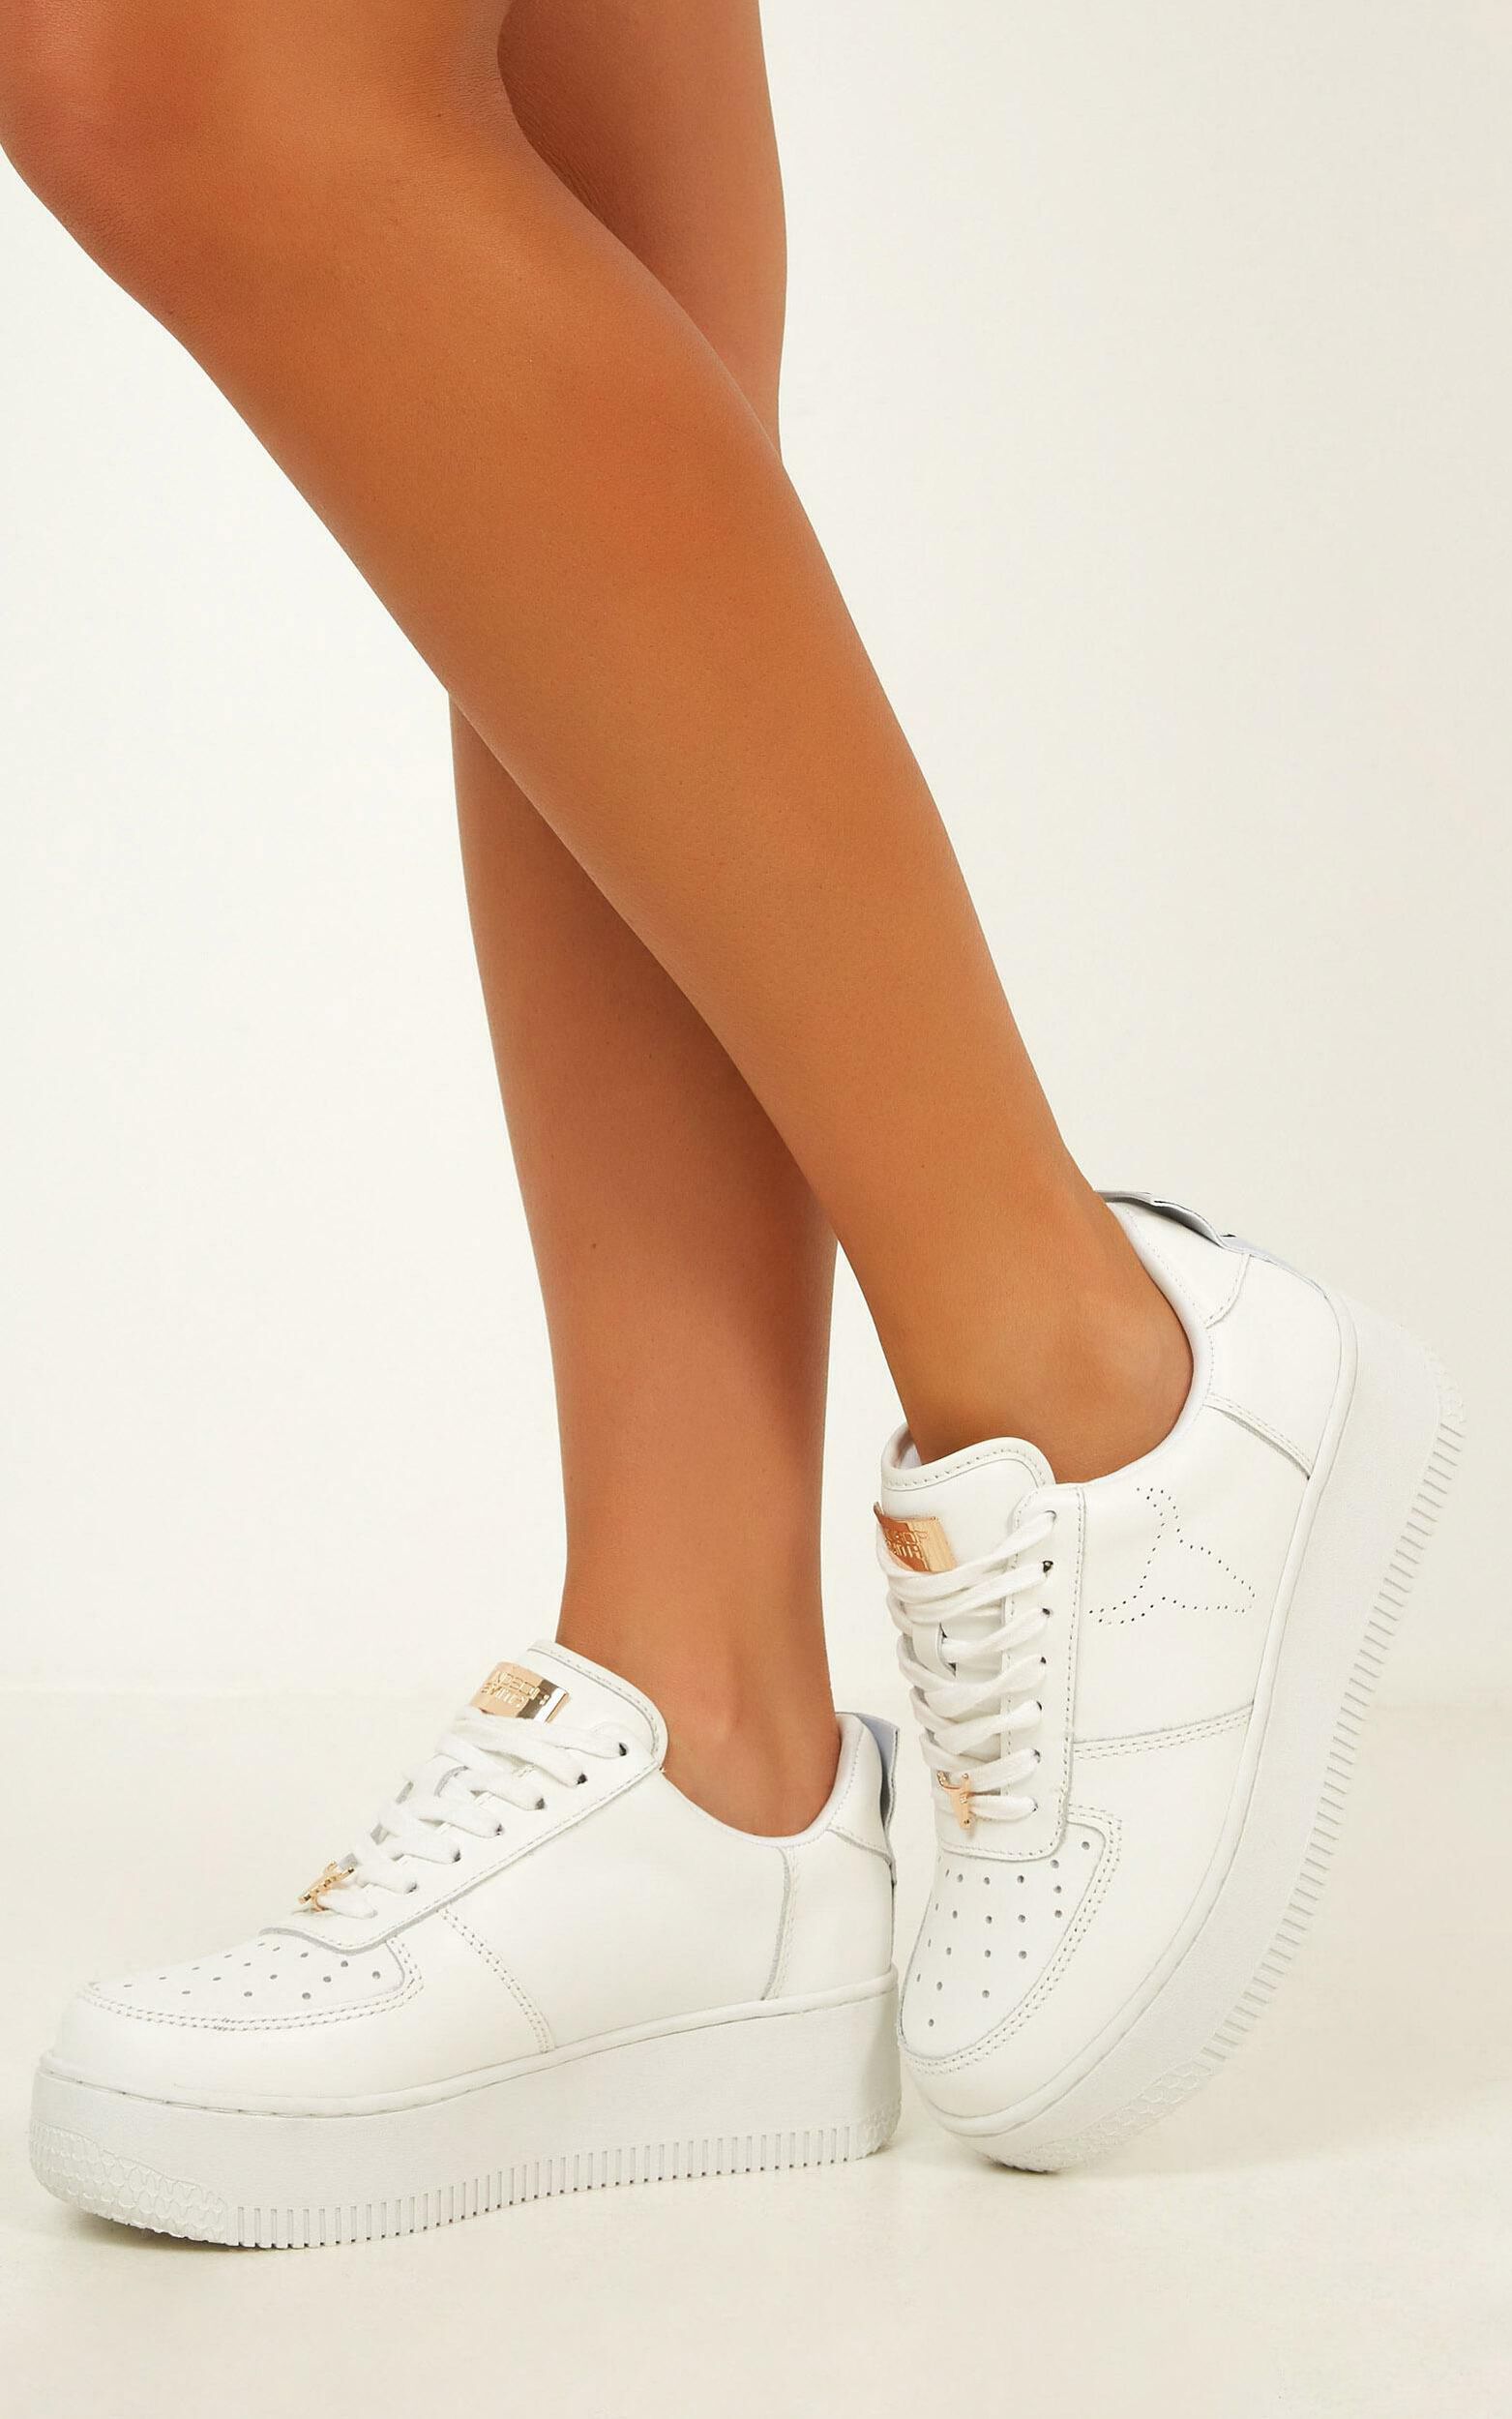 Windsor Smith - Racer Sneakers in white leather - 10, White